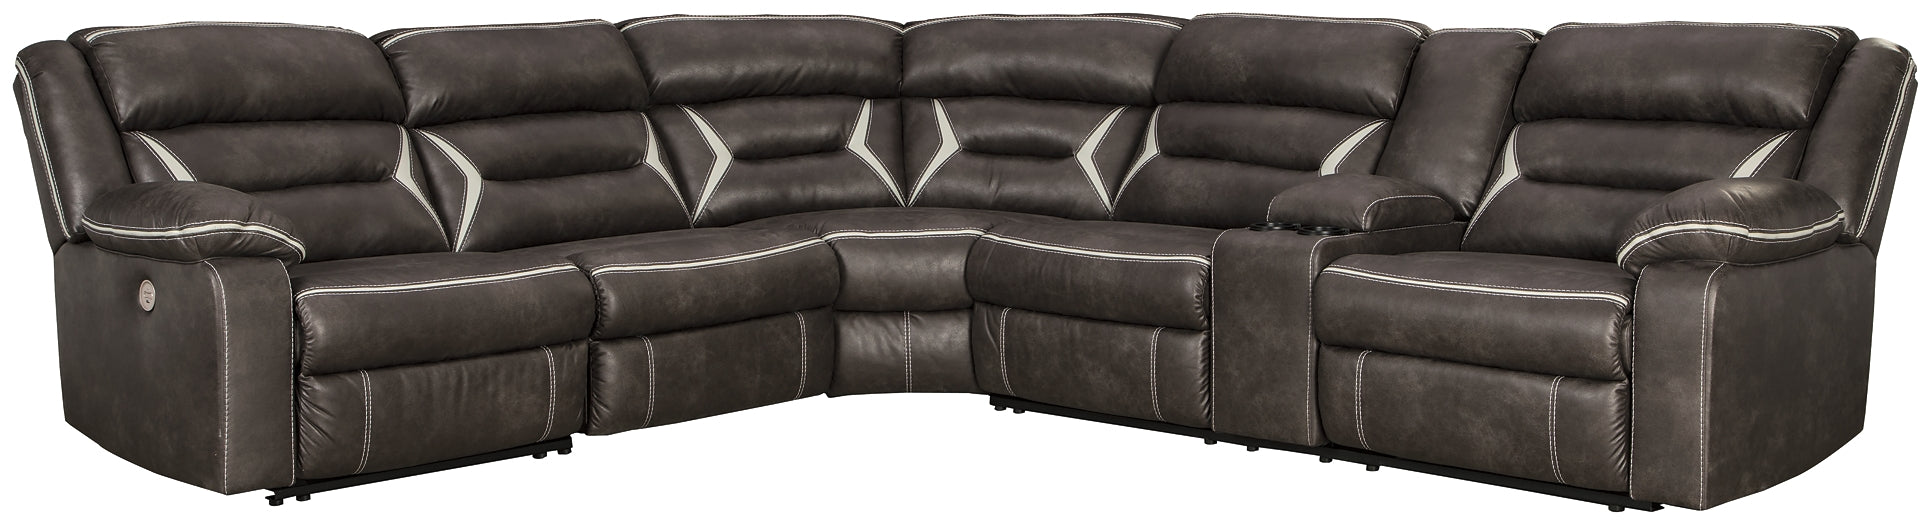 Kincord 4-Piece Sectional with Recliner JB's Furniture  Home Furniture, Home Decor, Furniture Store